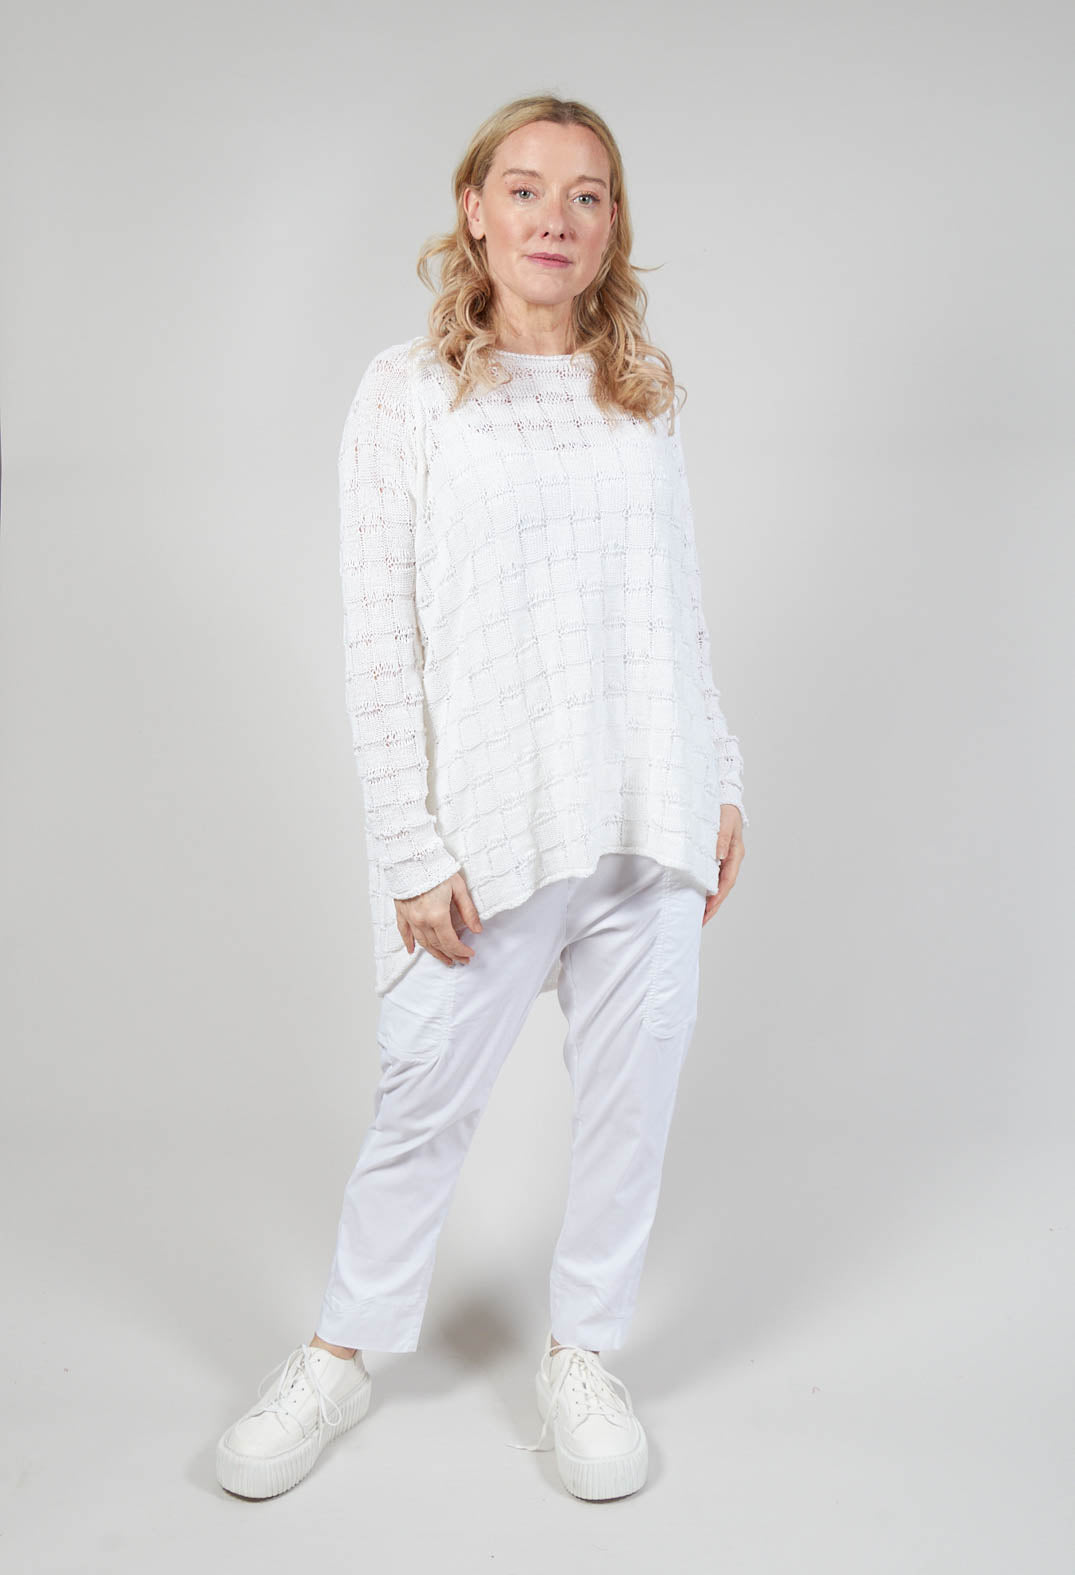 Jumper with Square Detail Knit in White